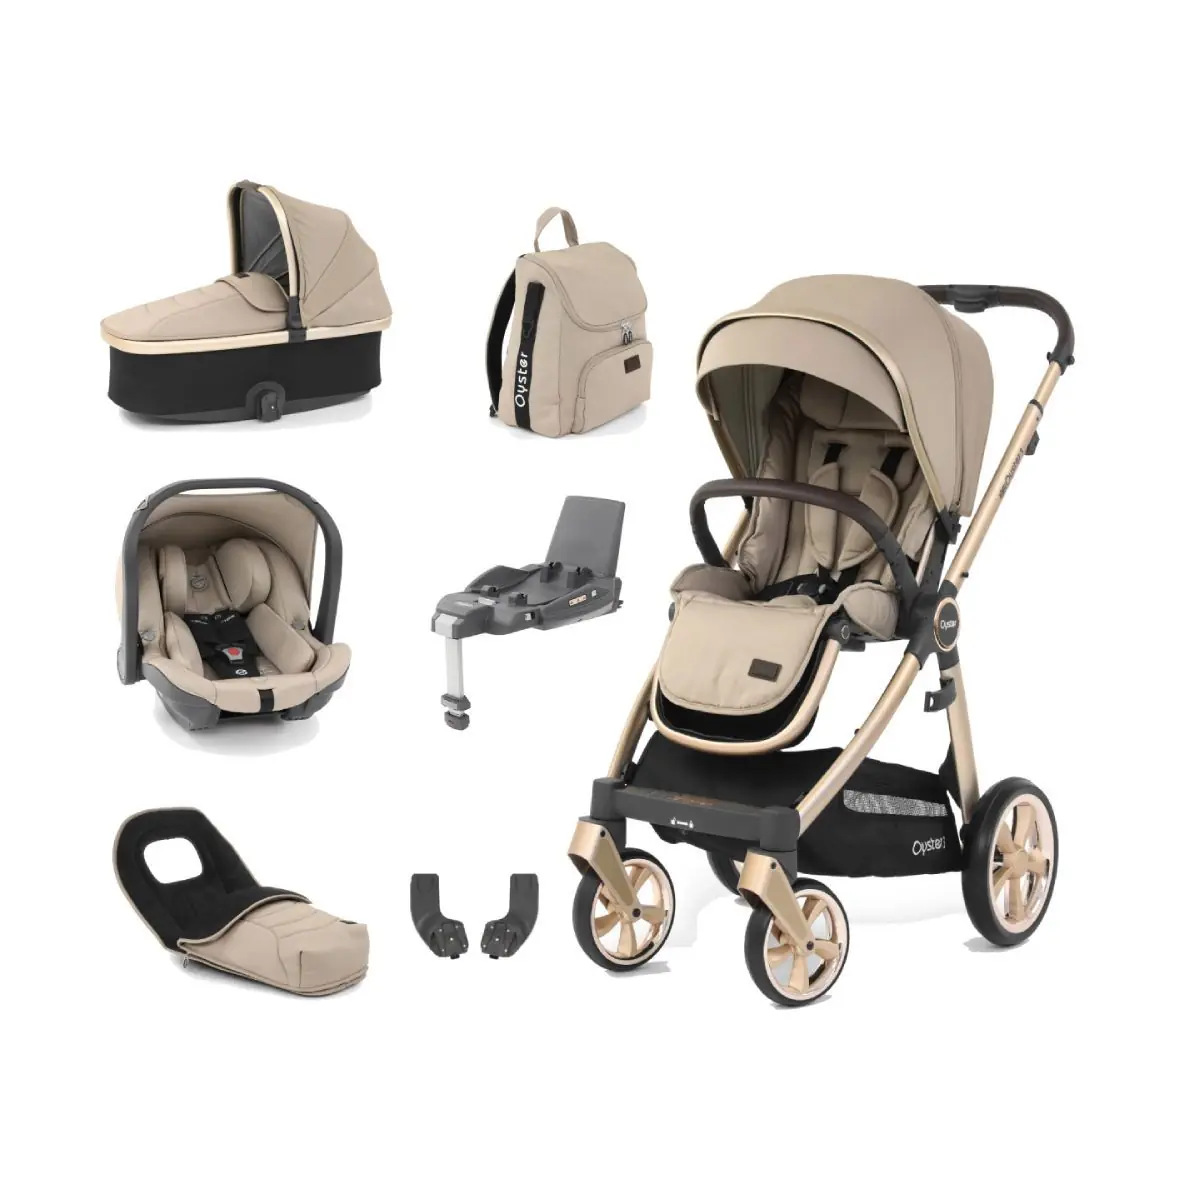 BabyStyle Oyster 3 Champagne Chassis Edition 7 Piece Luxury Travel System